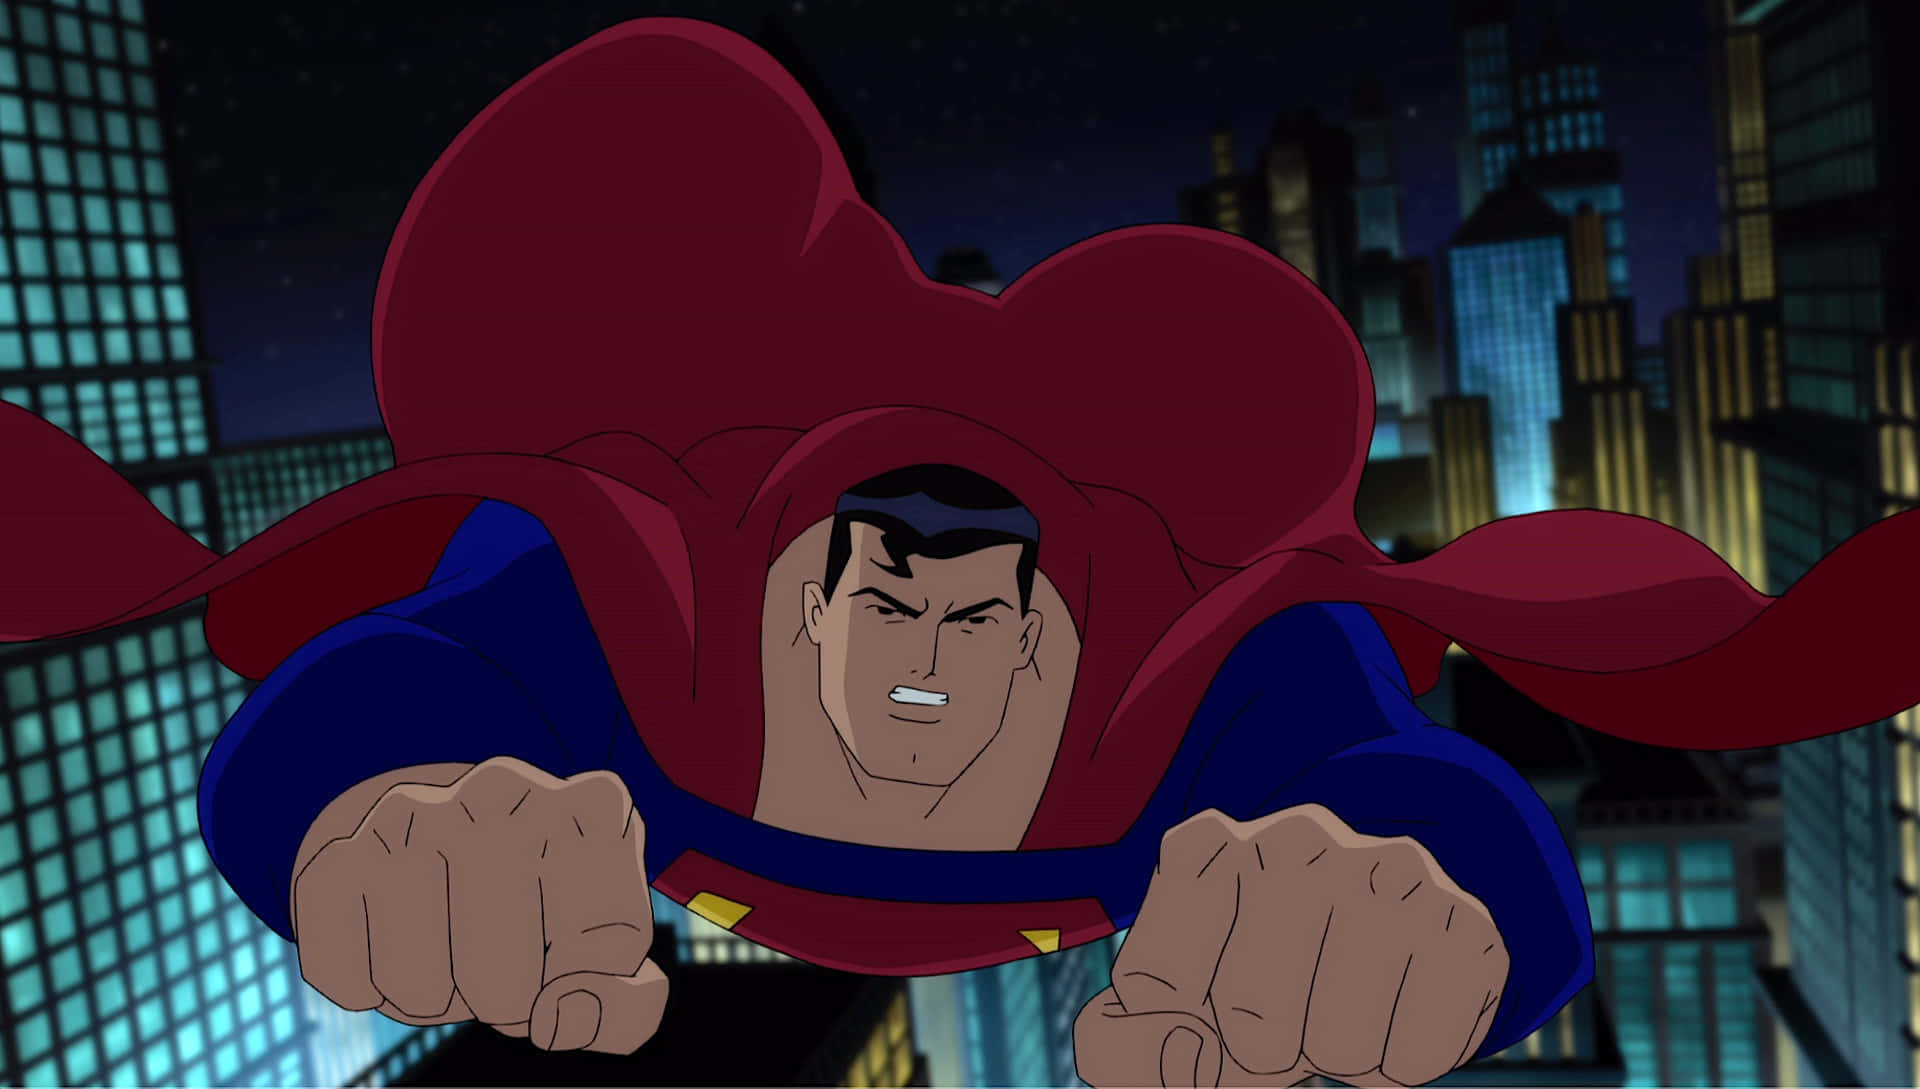 Superman soars through the sky in Superman: The Animated Series Wallpaper